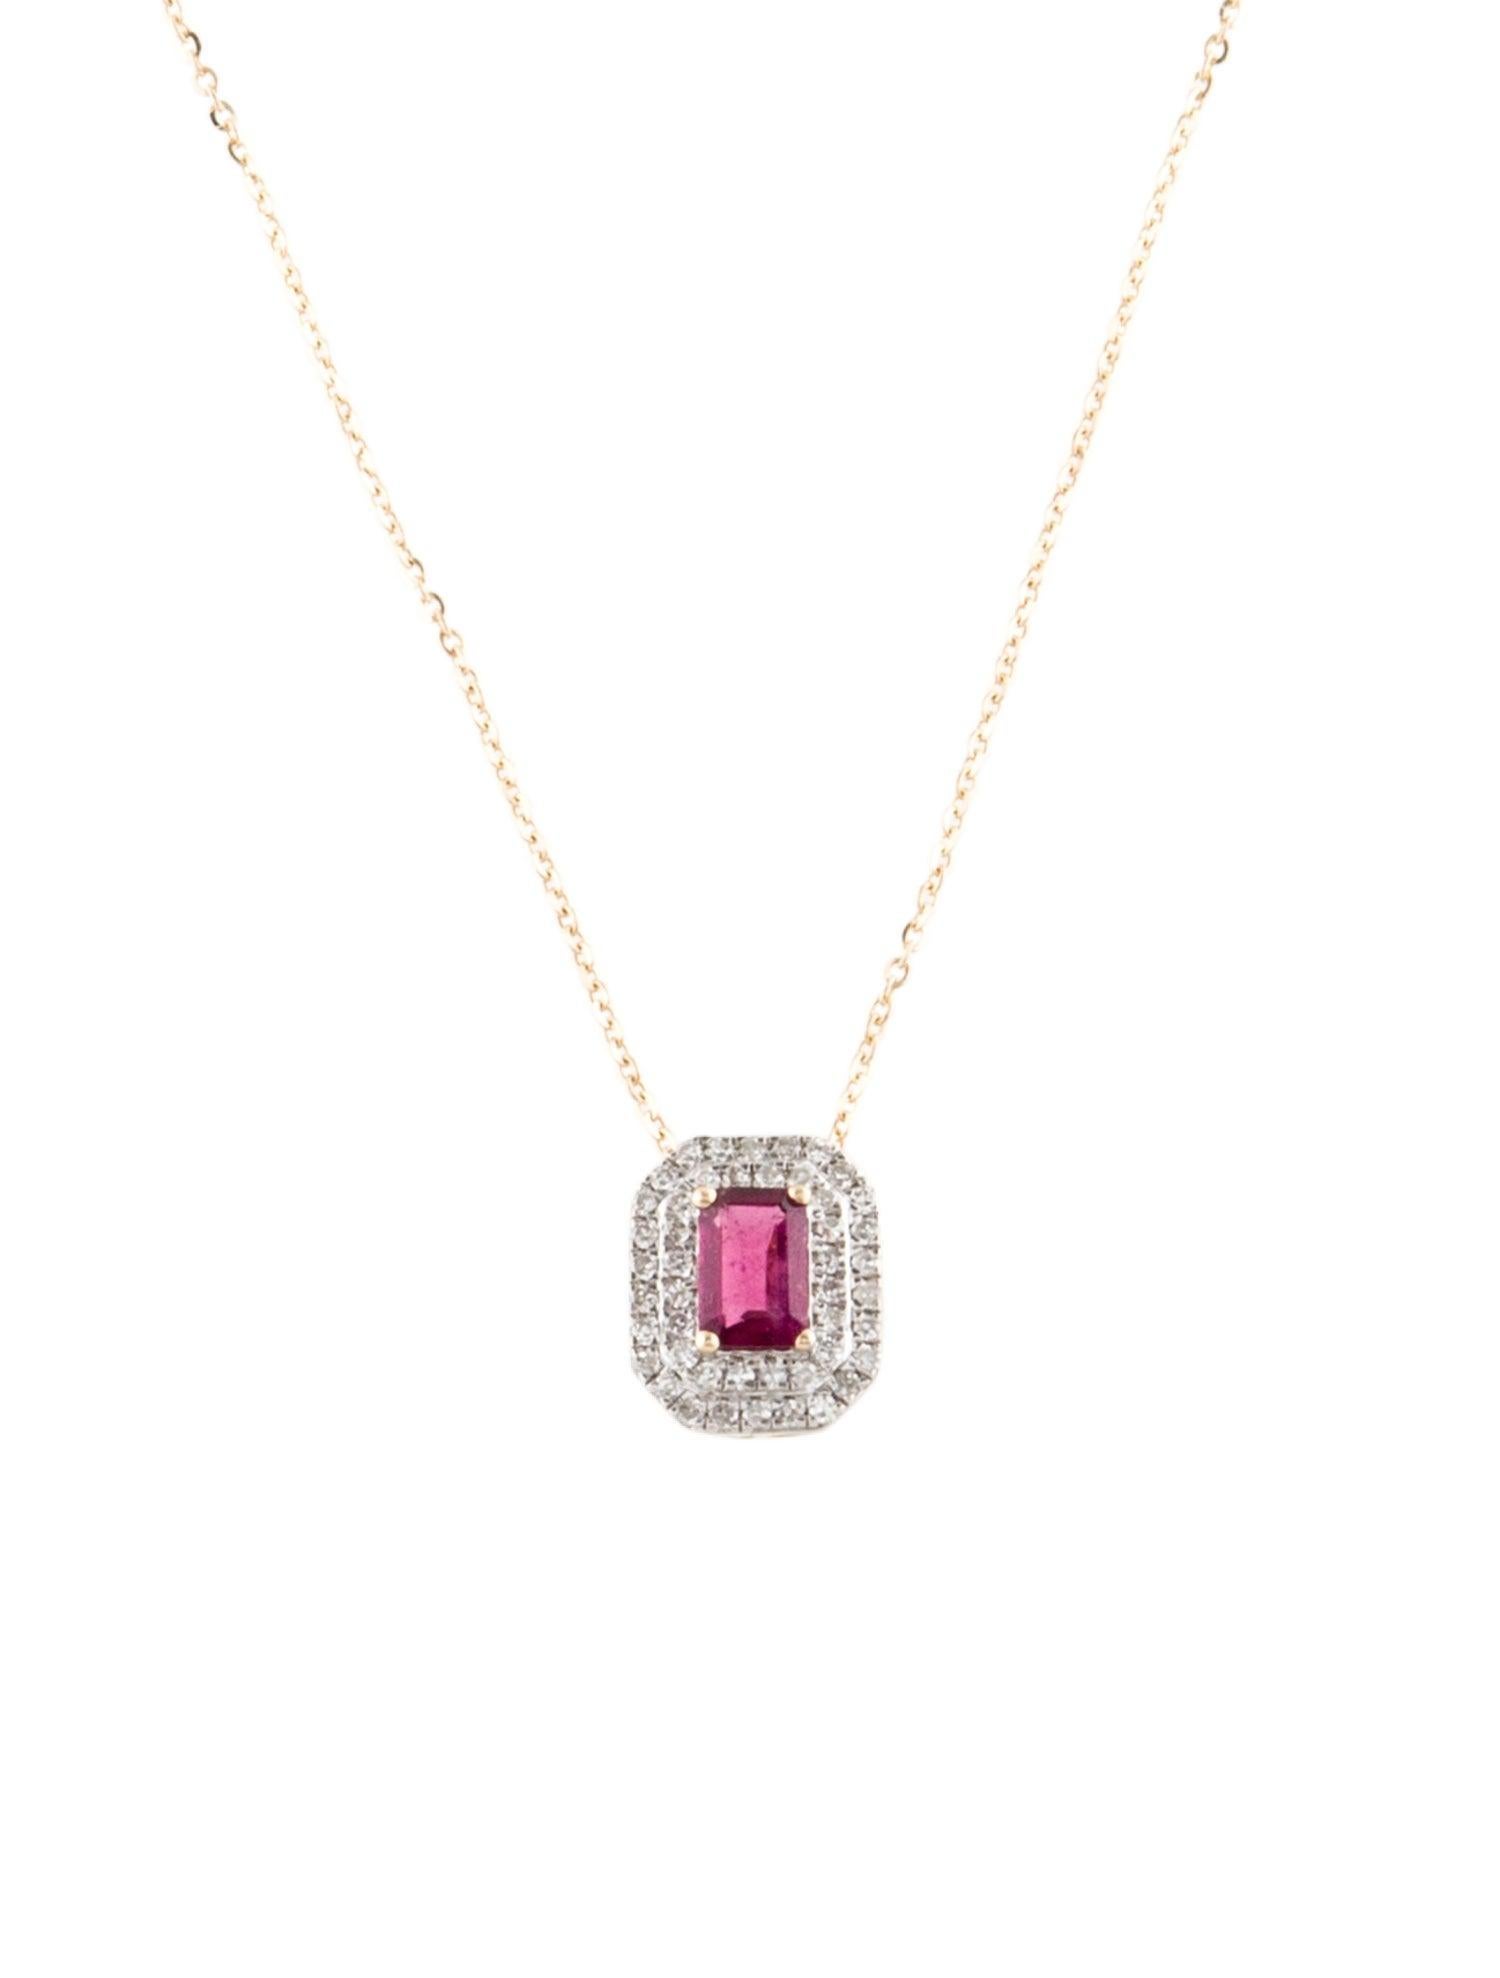 Luxurious 14K Tourmaline & Diamond Pendant Necklace: Elegant Statement Jewelry In New Condition For Sale In Holtsville, NY